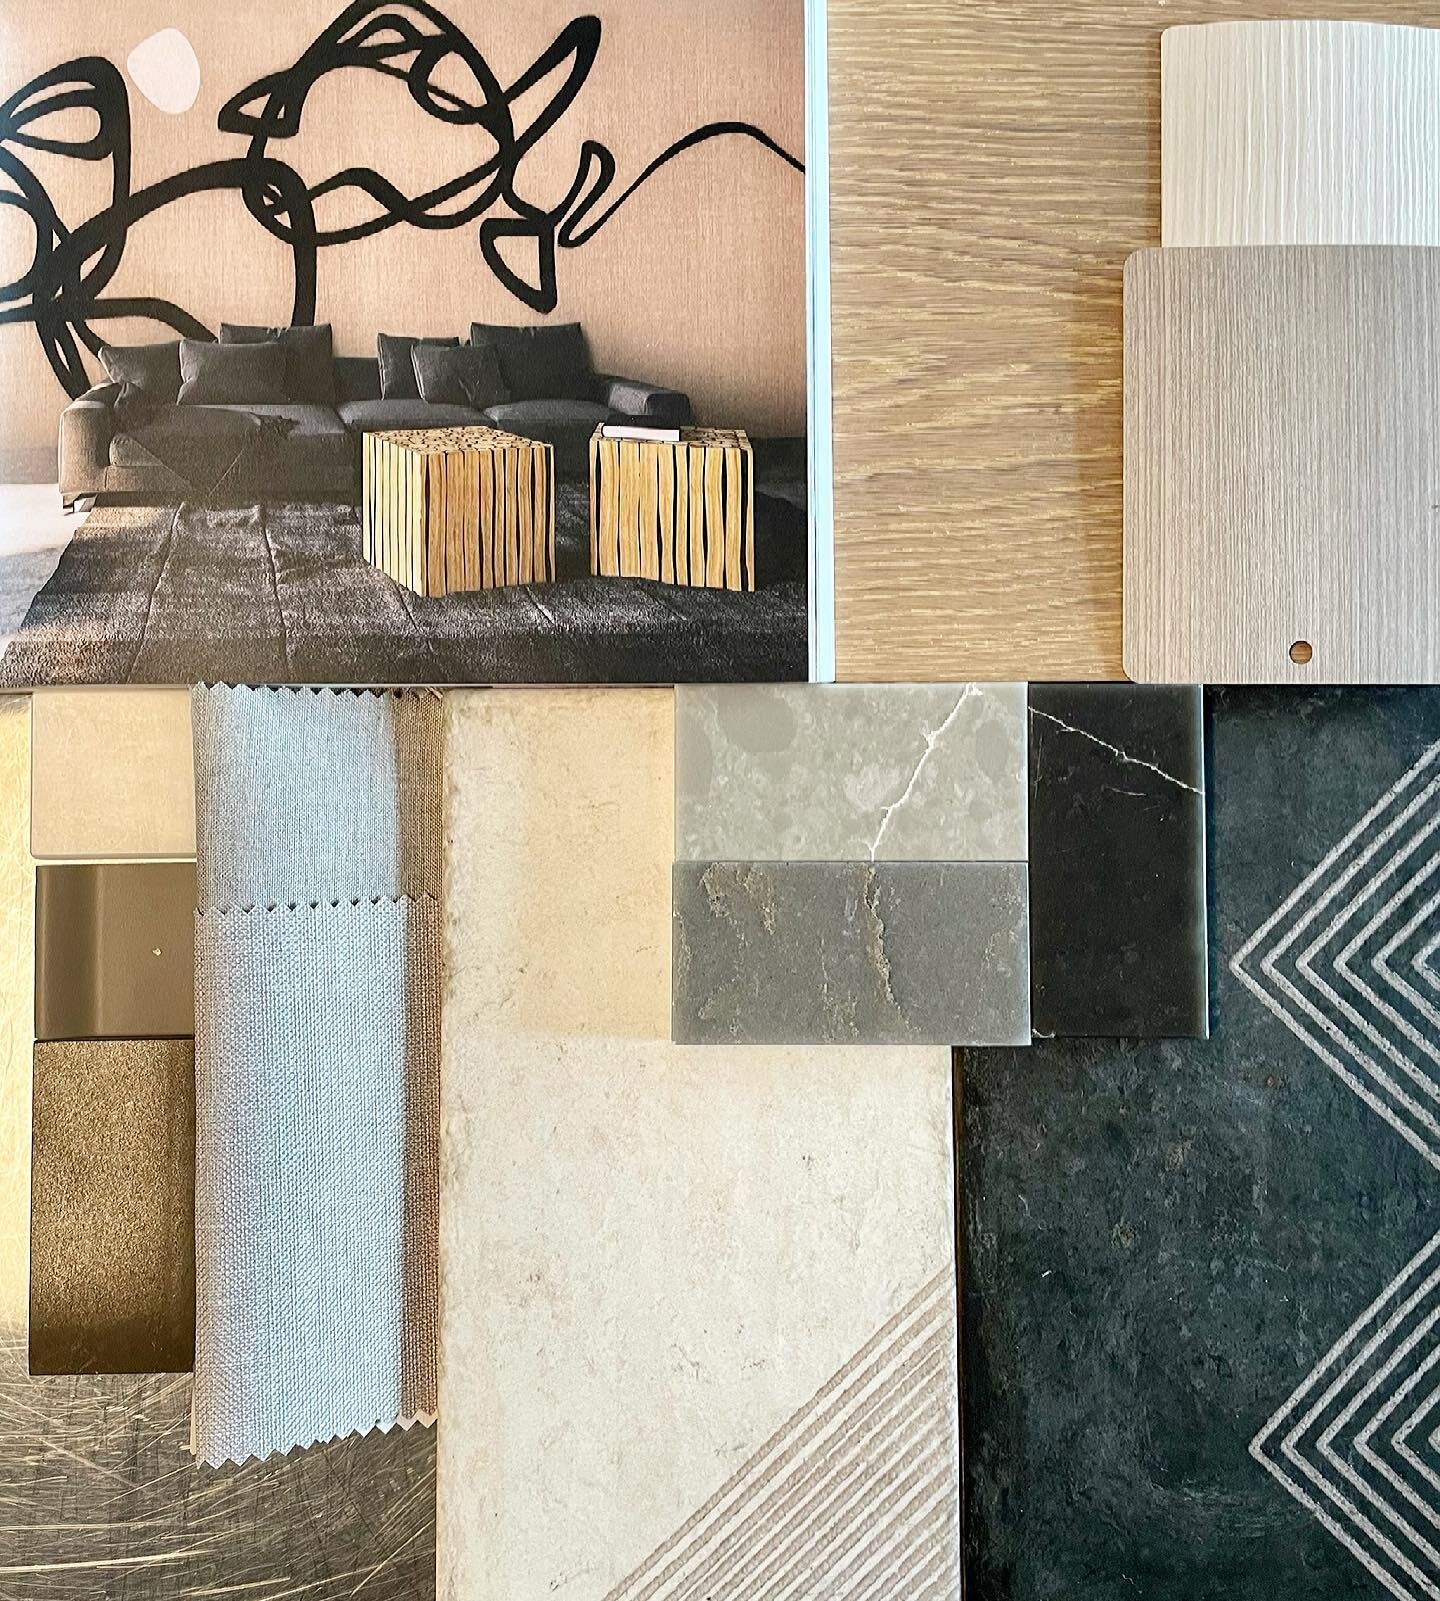 Pulling some chill earthy finishes for our new Med Spa project #medicaldesign #spadesign #organiccontemporary #interiordesign #studioleainteriors #wilsonart #formica #nevamar #nustone #areaenvironments  #johnsonhardwood #petratile 💫